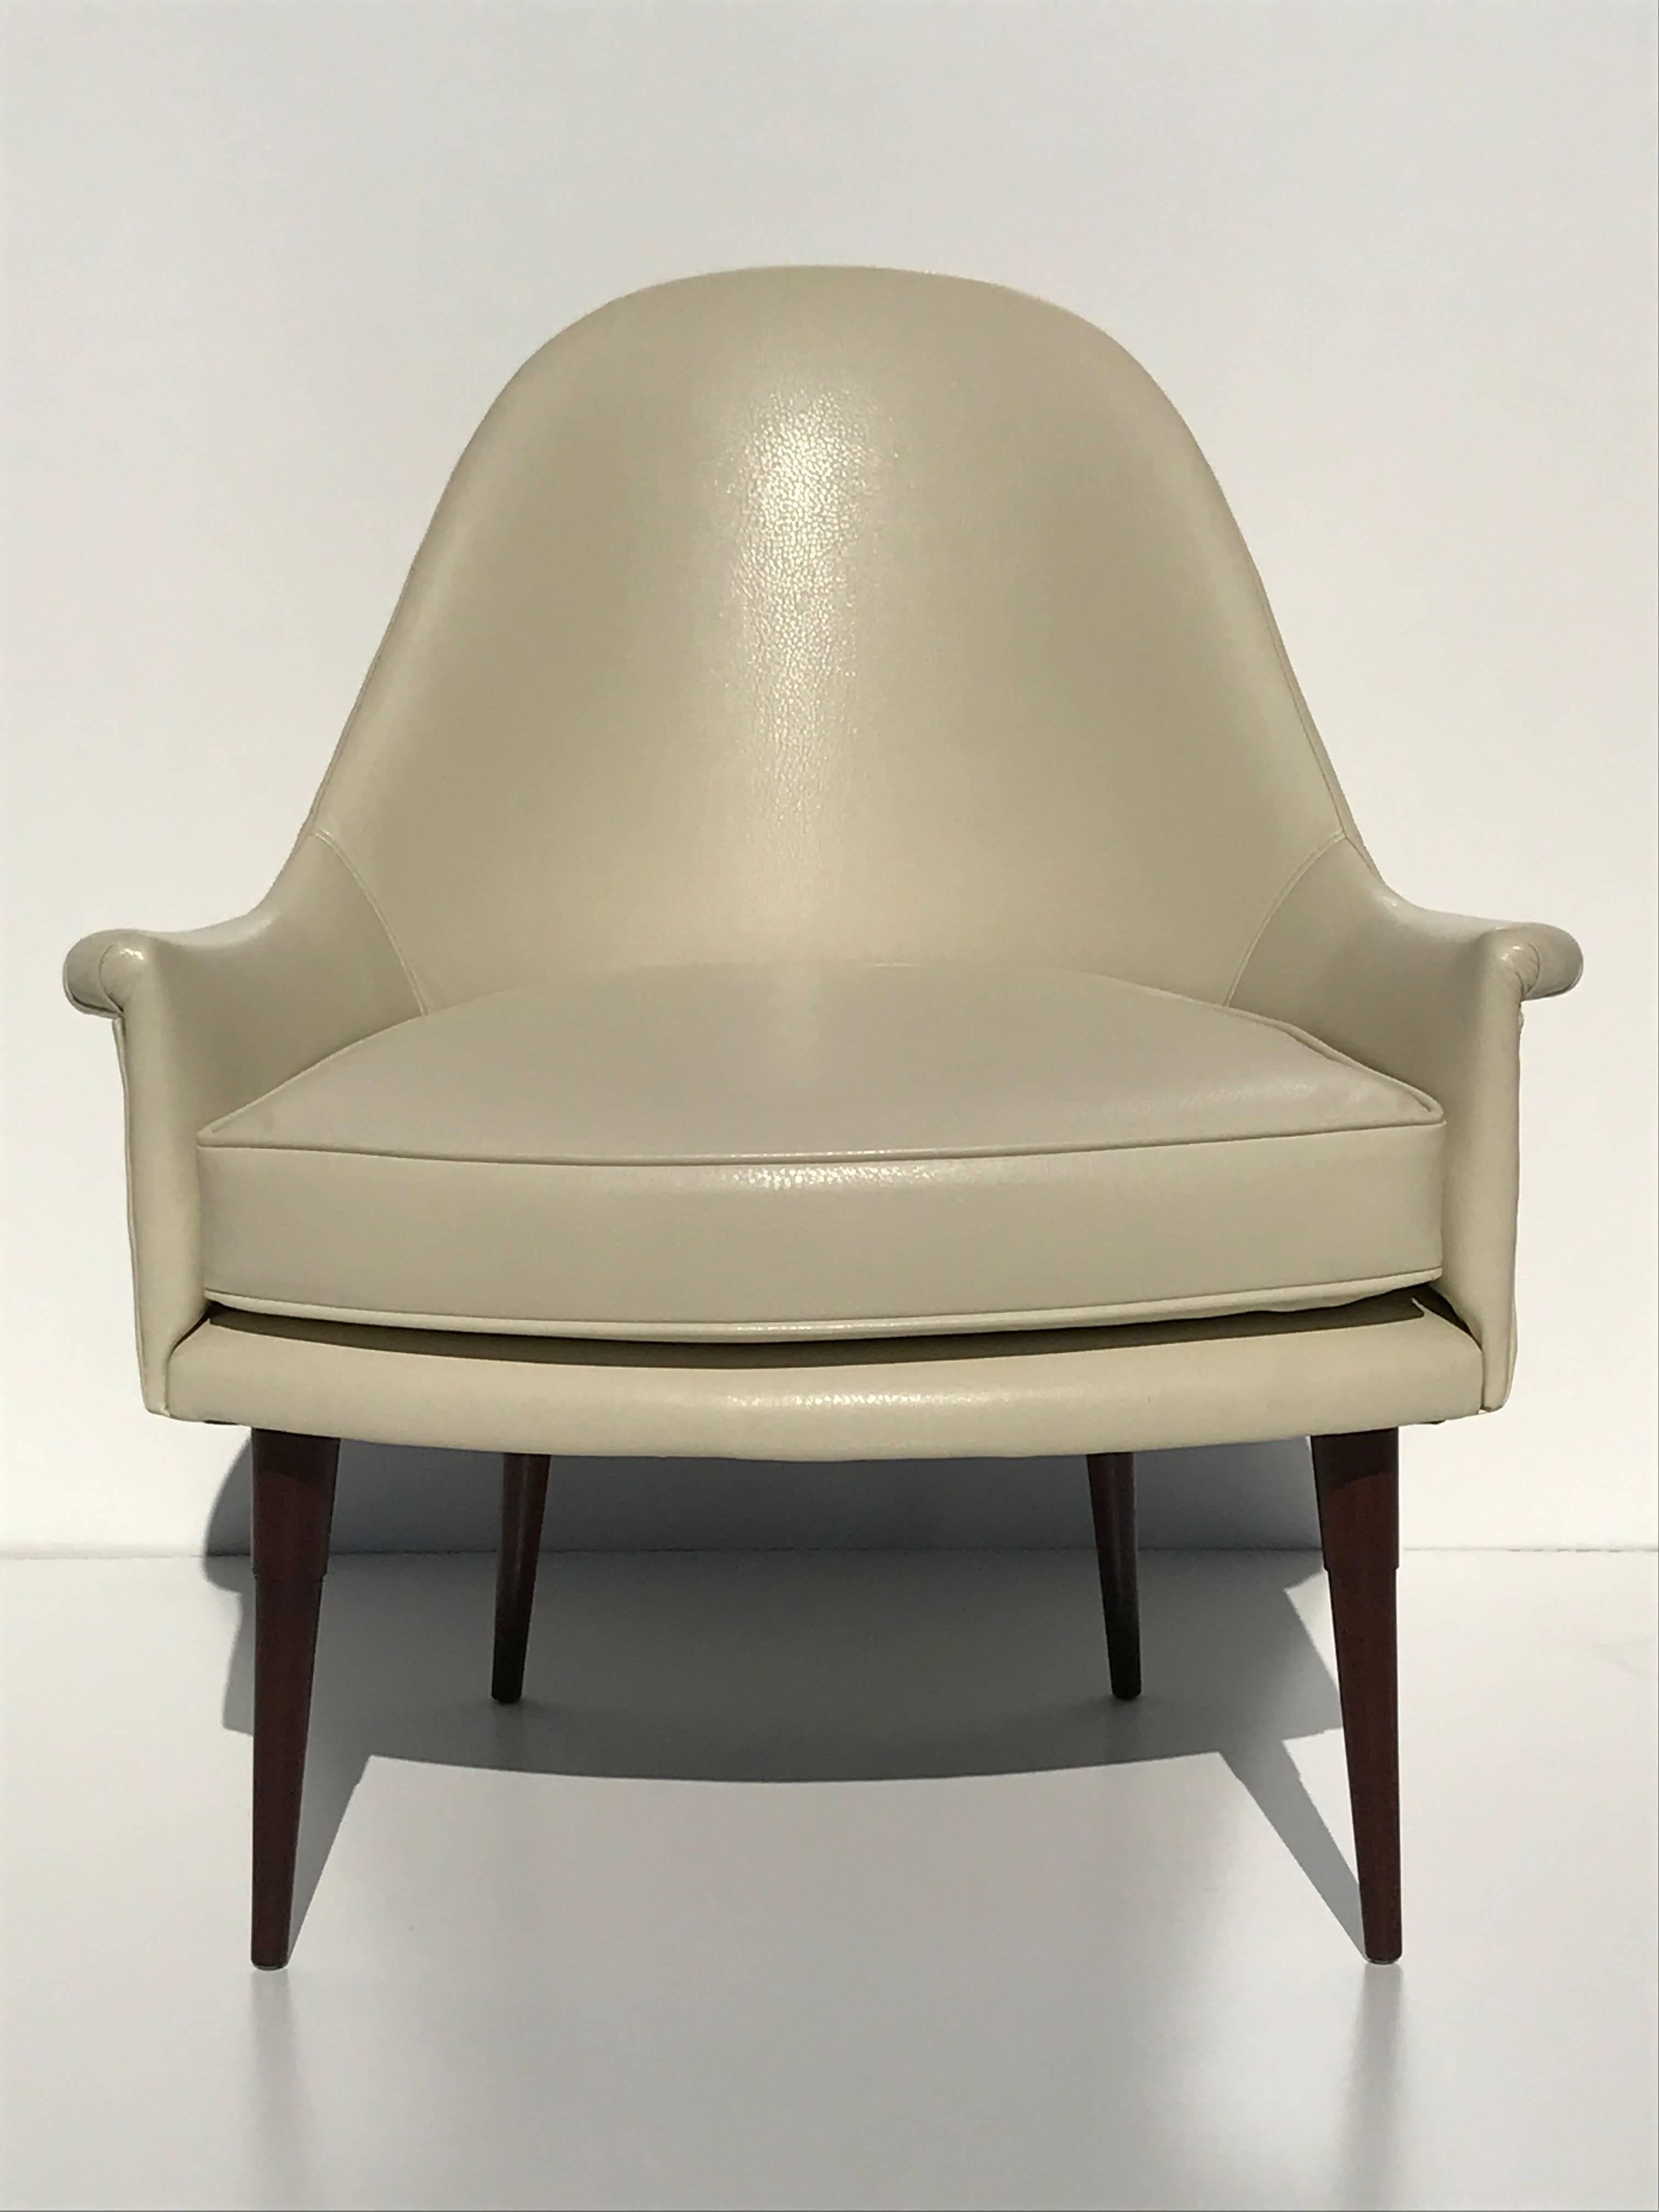 Mid-20th Century Petite Mid-Century Scoop Back Lounge Chair For Sale